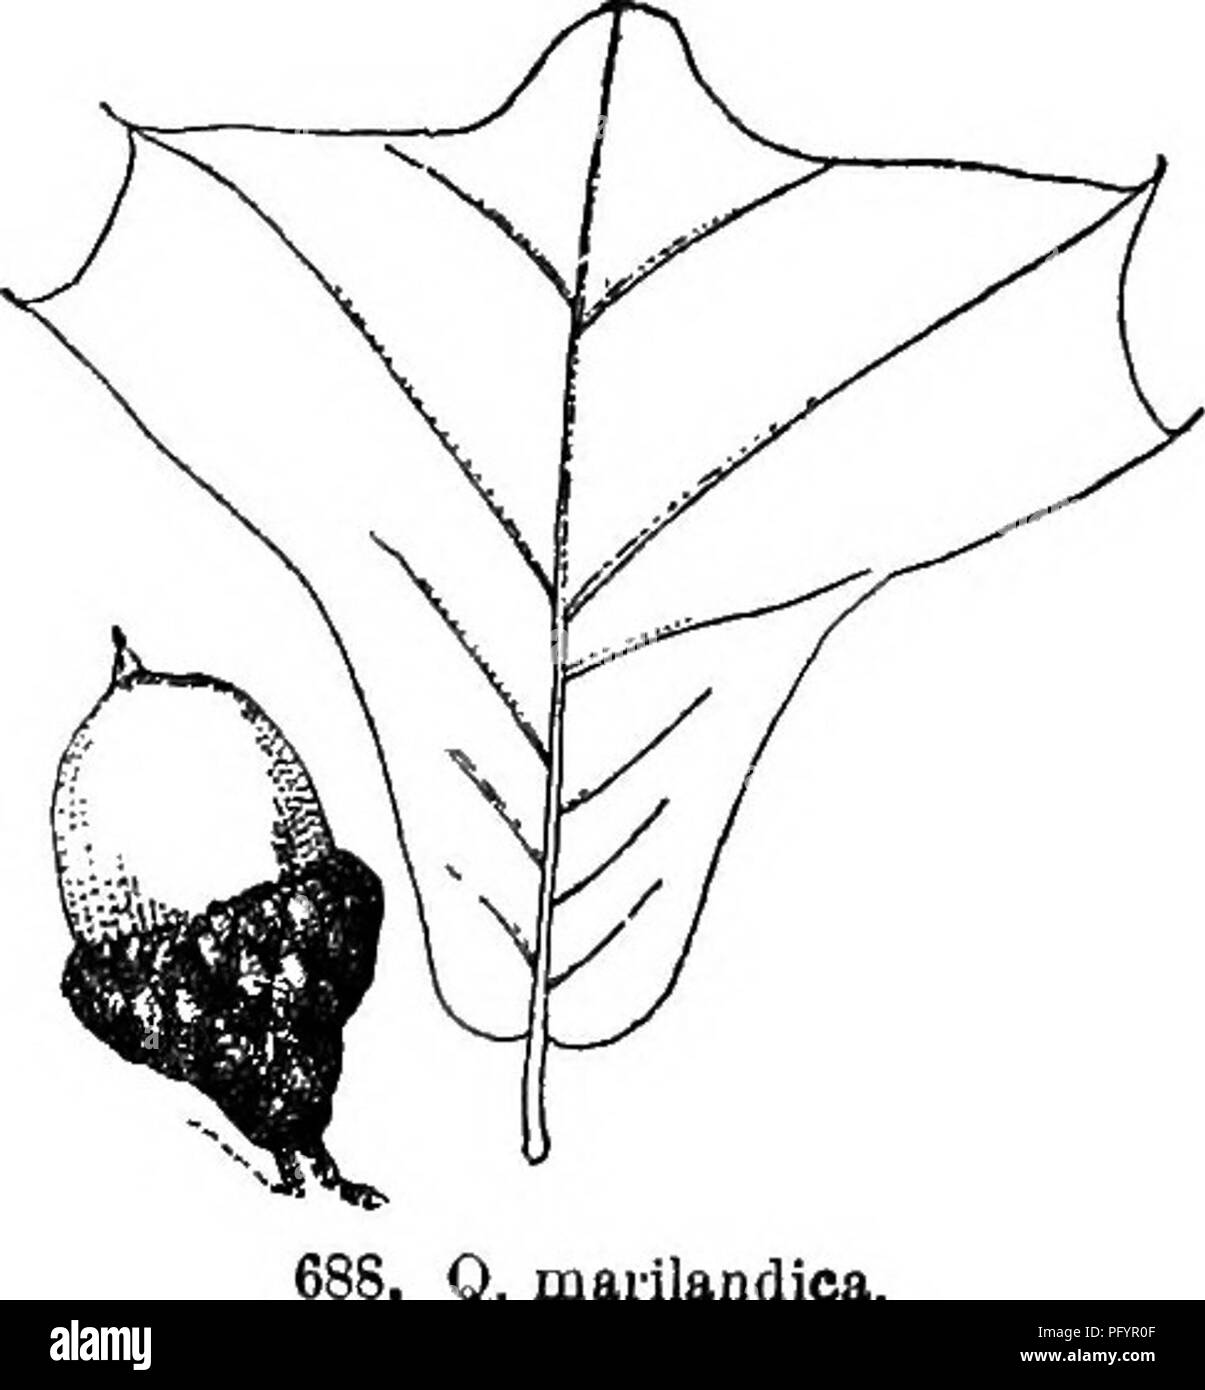 . Gray's new manual of botany. A handbook of the flowering plants and ferns of the central and northeastern United States and adjacent Canada. Botany. Q. marilandica. cised or smuate-pinnatifid (then mostly bristle-pointed). Fig. 687. 1 20. Q. mariUndica Muench. (Black Jack or Barren O.) Leaves broadly wedge- shaped, but sometimes rounded or obscurely cordate at the base, widely dilated and somewhat 3 (rarely 5)-lobed at the summit, occasionally with one or two lateral conspicuously bristle-tipped lobes or teeth, rusty-pubes- cent beneath, shin- ing above, large, 1-2.5 dm. long. (Q. nigra Man. Stock Photo